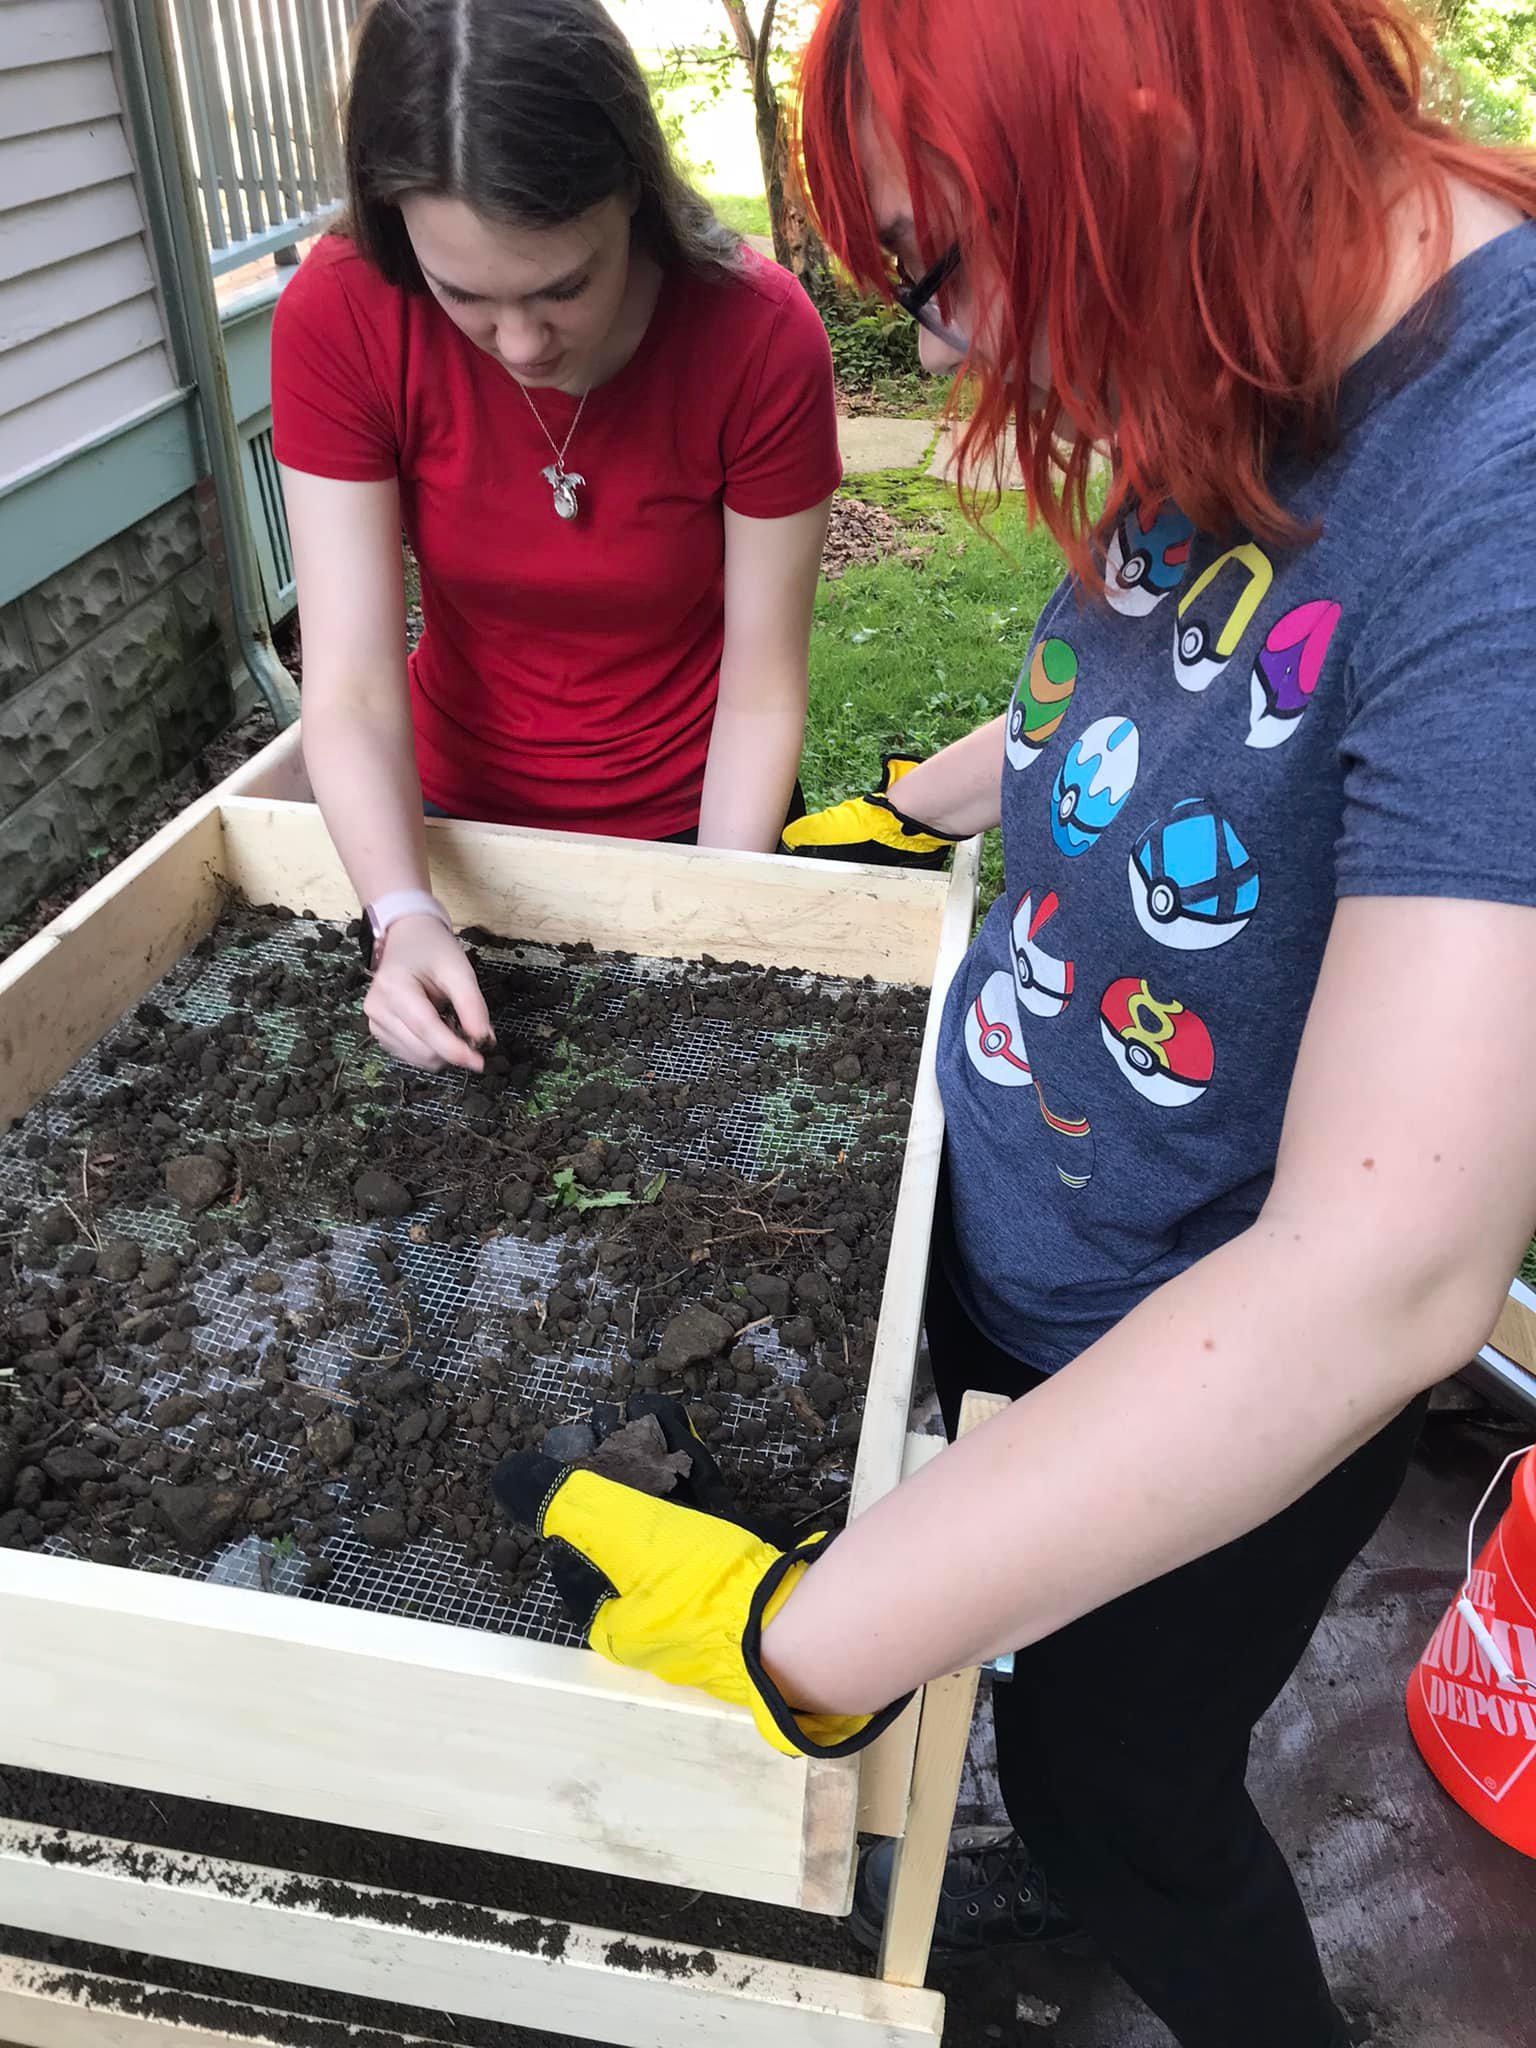 SUNY Oswego student archaeologists dig in while examining items they have unearthed at the local historic home and museum known as the Richardson-Bates House